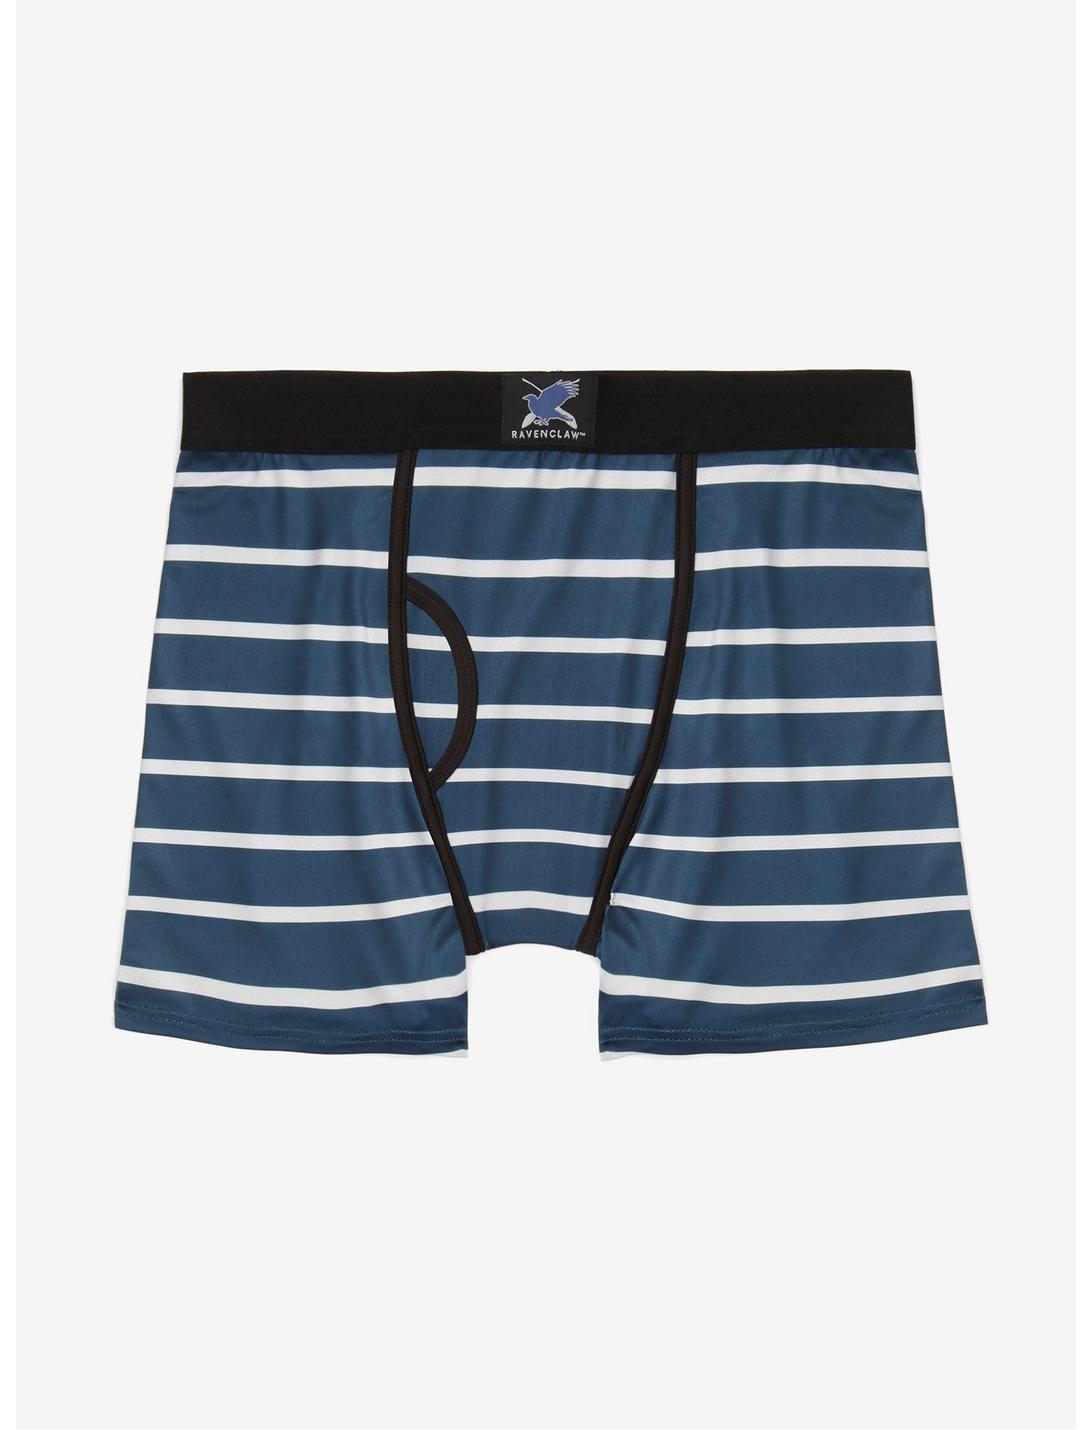 Harry Potter Ravenclaw Striped Boxer Briefs - BoxLunch Exclusive, BLUE, hi-res